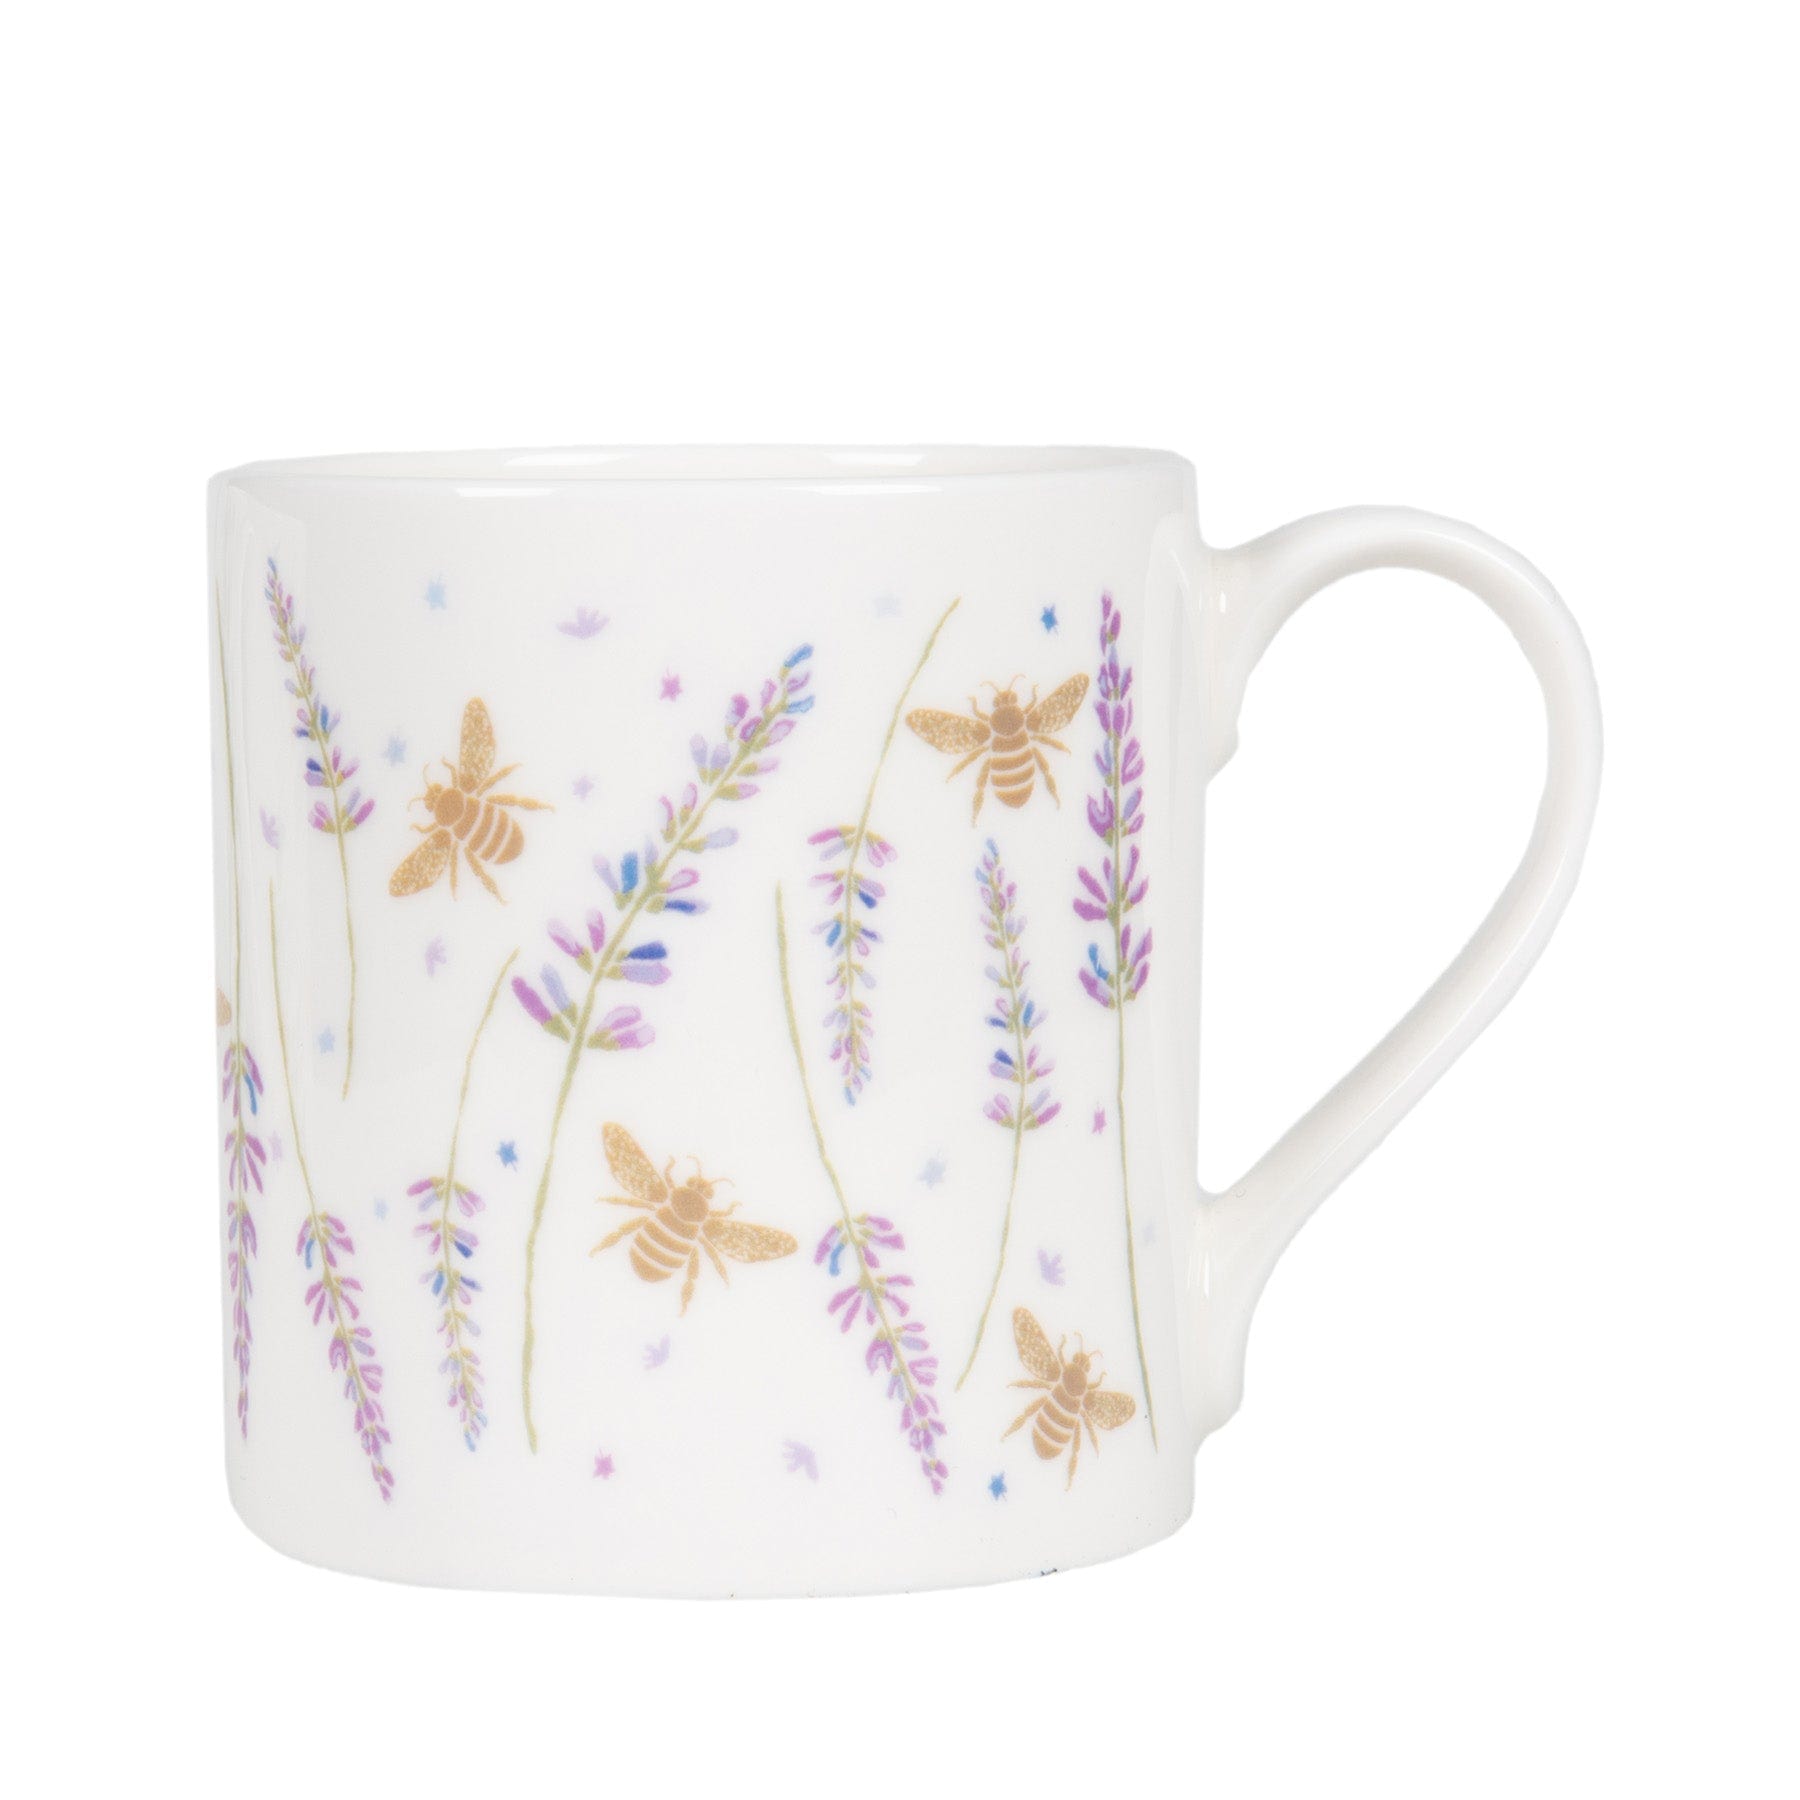 White ceramic mug with lavender and bee pattern, floral mug design, isolated on white background, coffee cup with handle